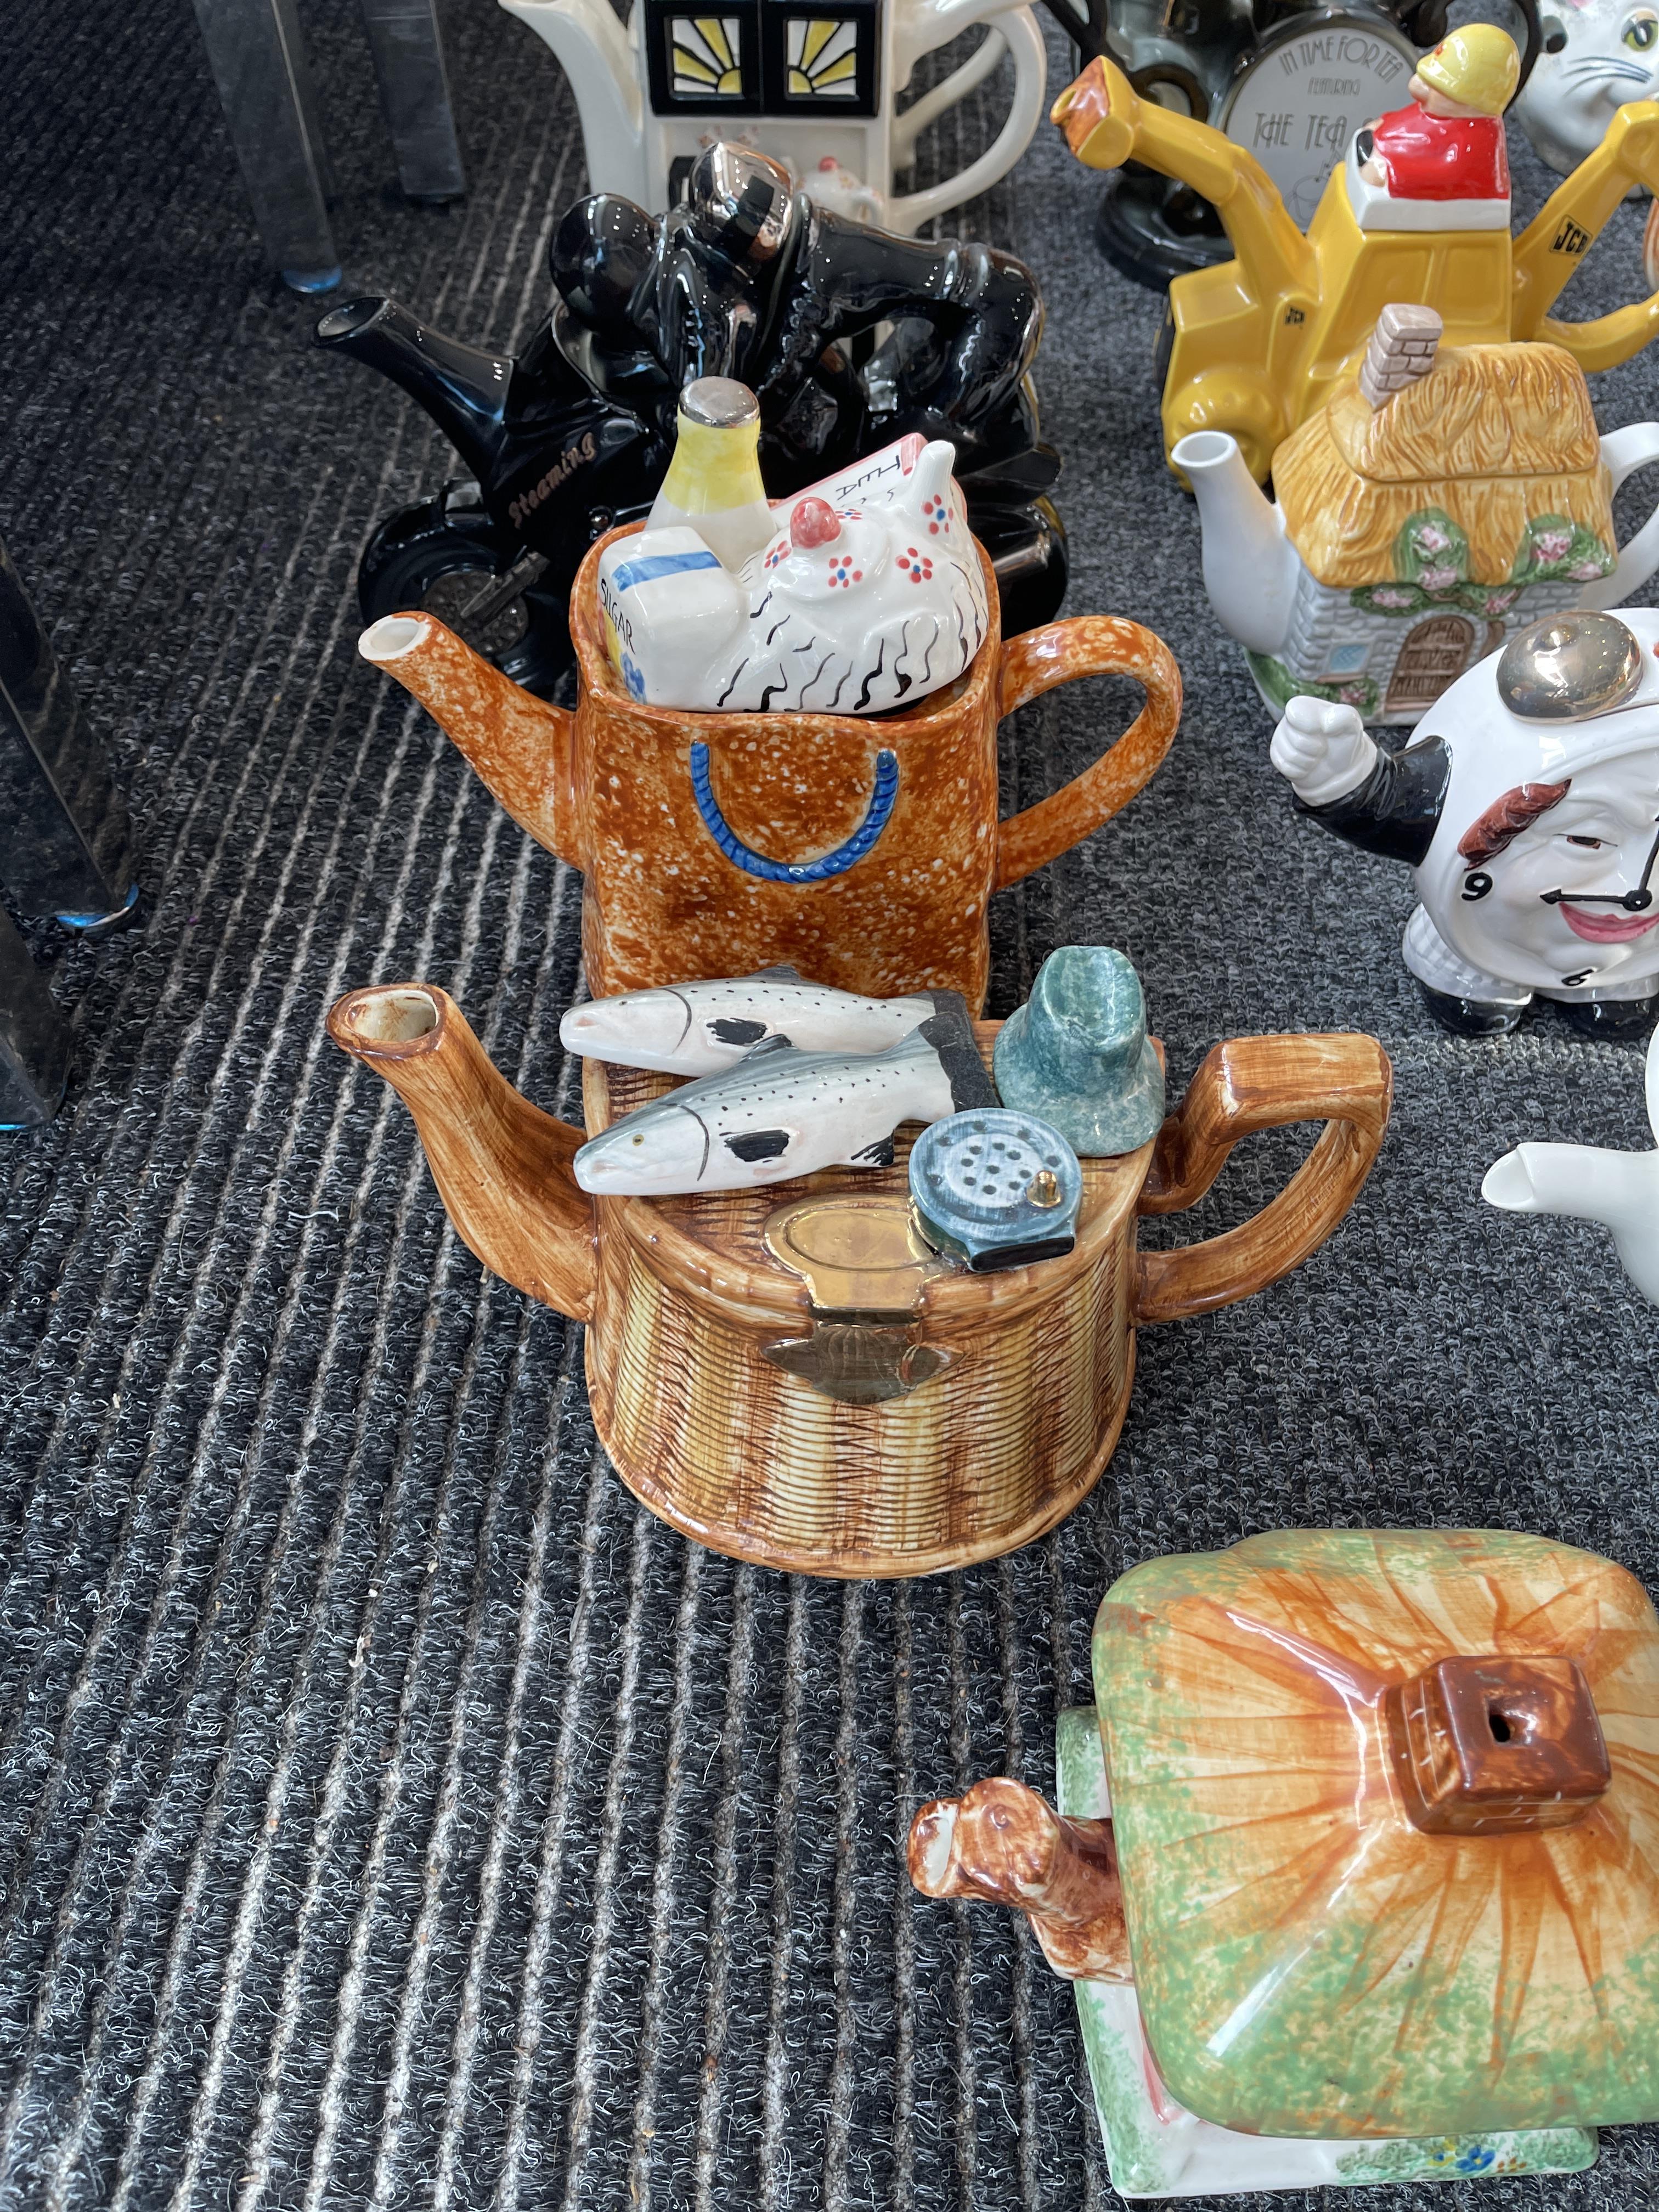 Collection of Ceramic Tea Pots - Image 31 of 44